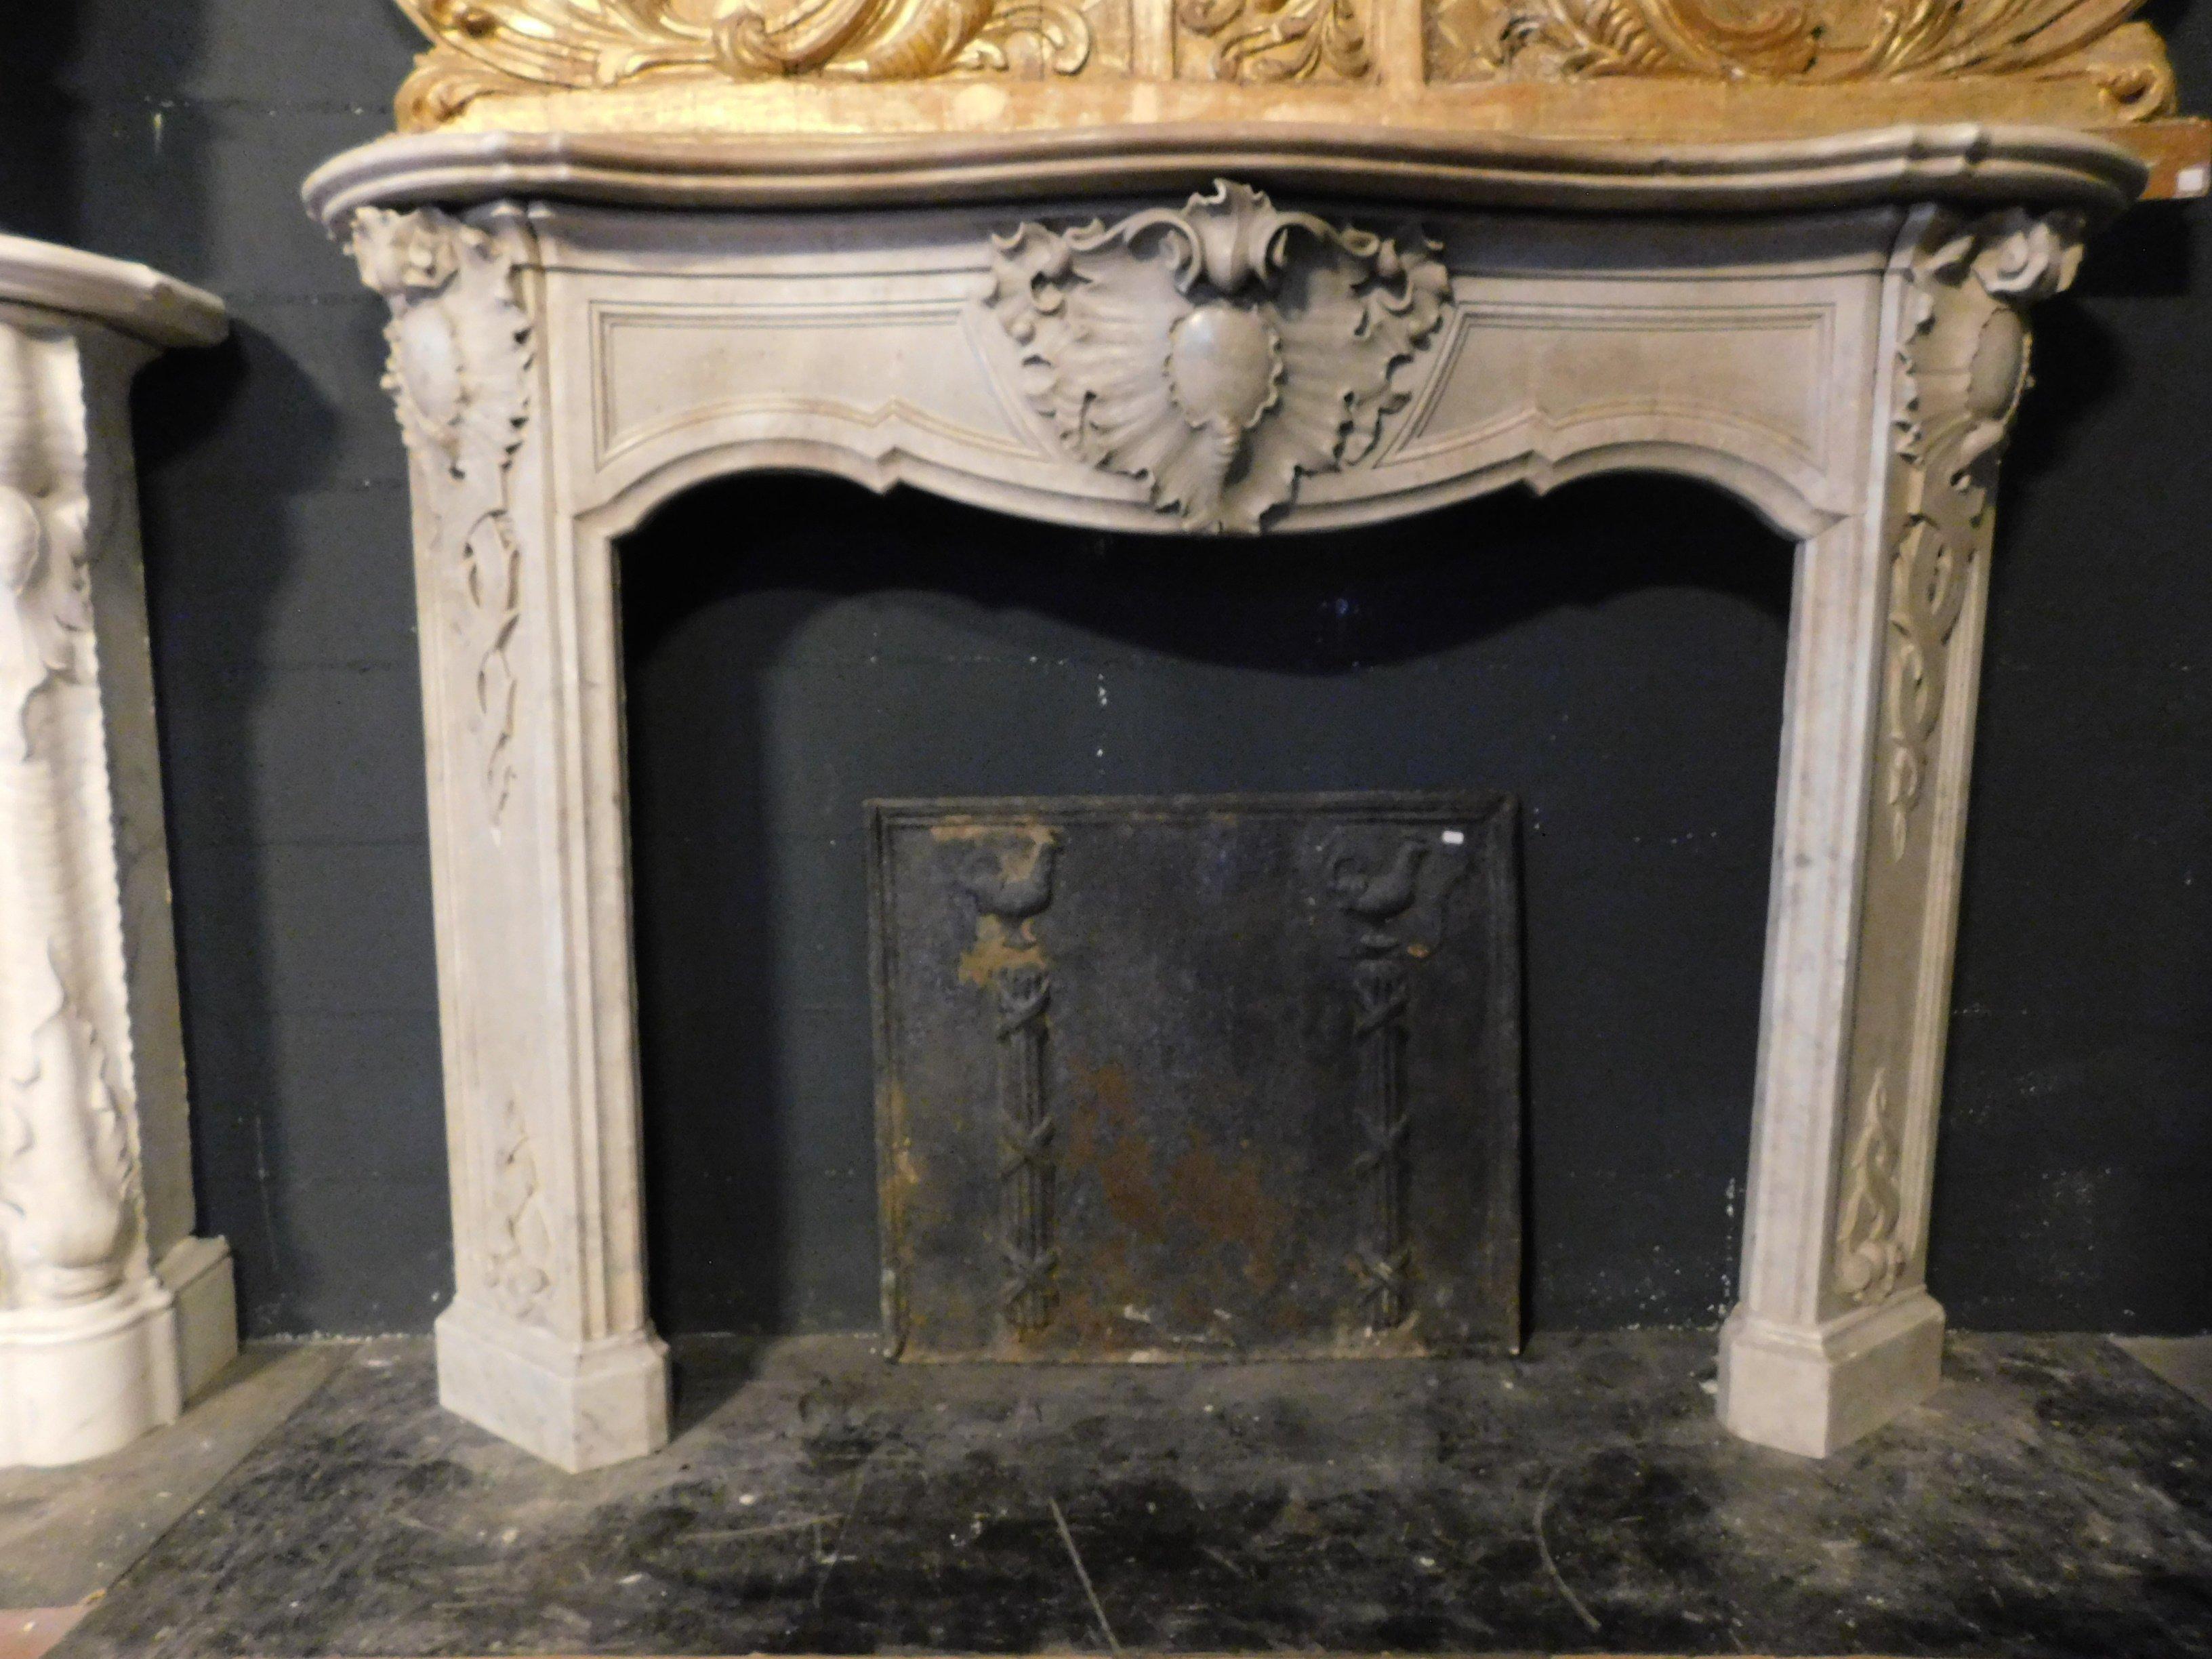 Antique mantel fireplace, hand carved in precious white grey marble, richly carved with floral and vegetable motifs, great luxury and prestige of refined sculpture, built in the early 19th century, for a noble family palace in northern Italy,